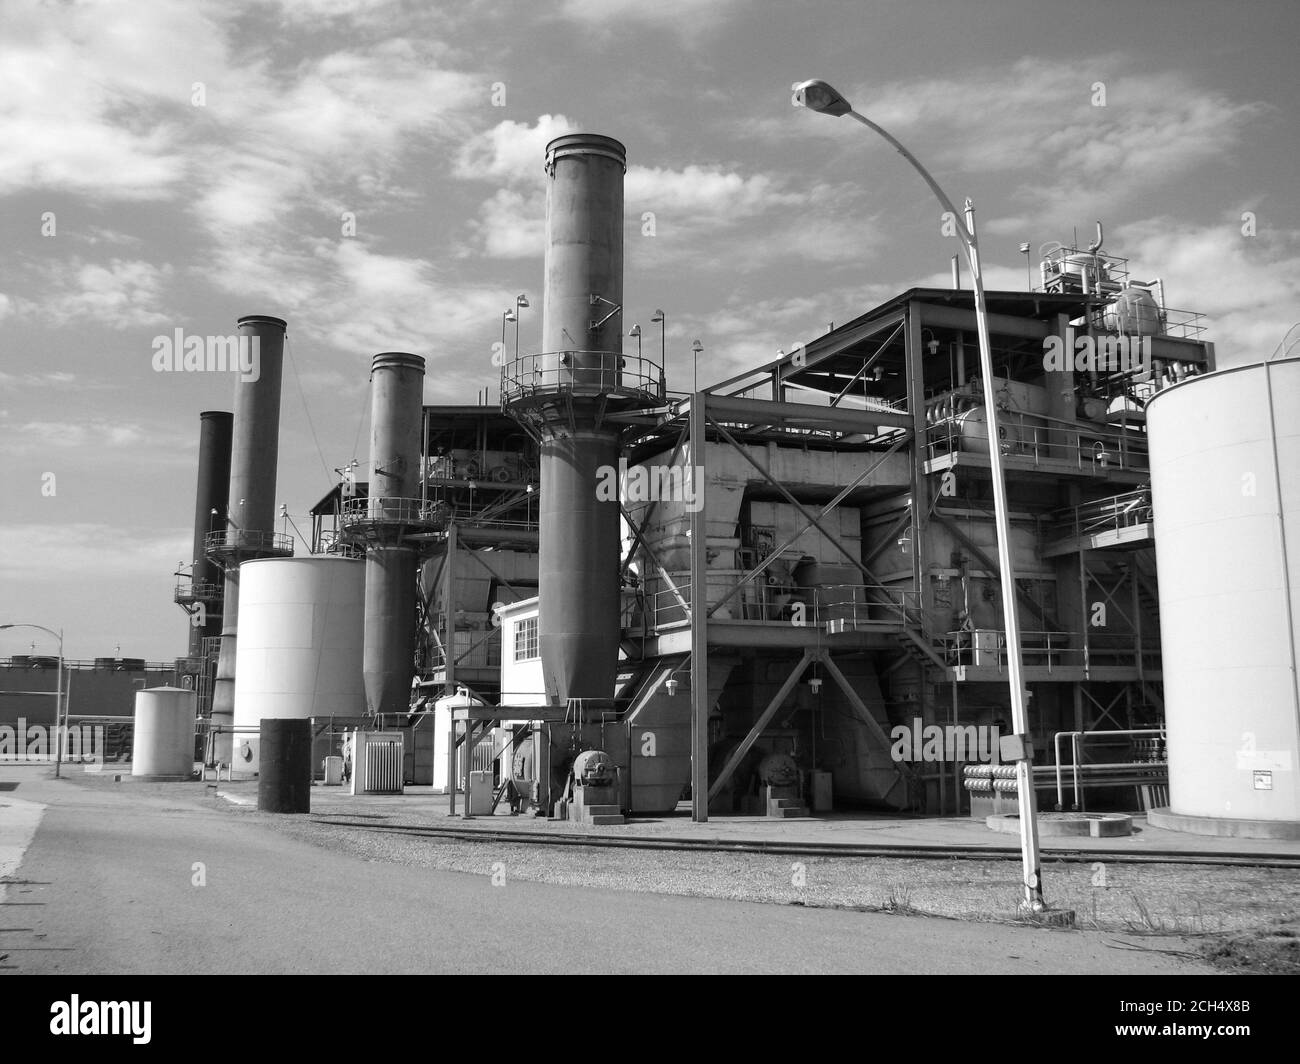 Grand Terrace, California, USA - July 2007:  Archival black and white view of smoke stacks and structures at the now demolished Grand Terrace power plant in Southern California. Stock Photo